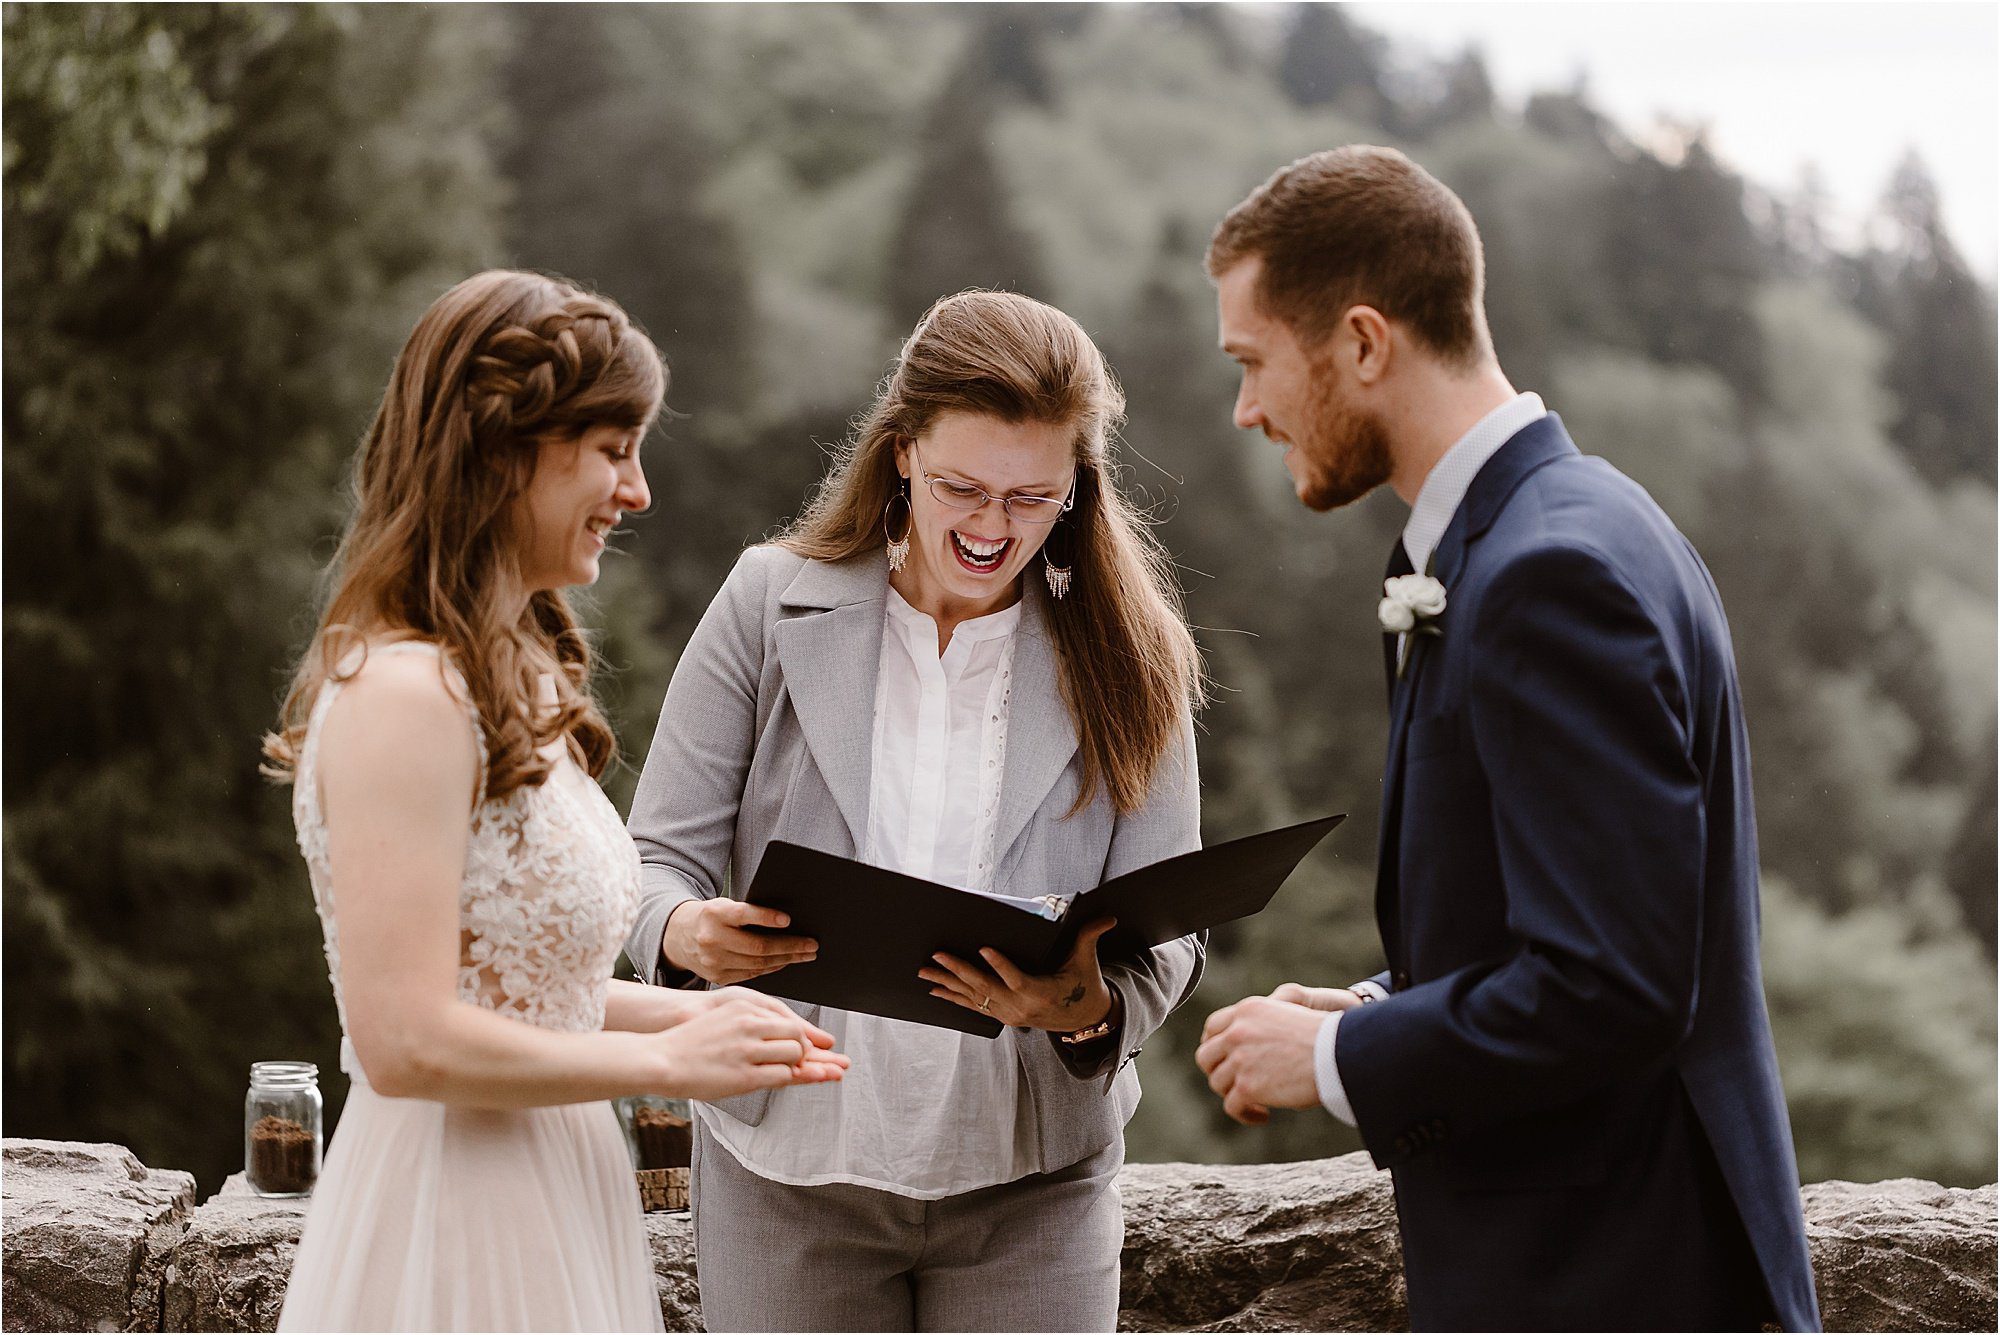 bride, groom, and officiant laugh during ring exchange at elopement